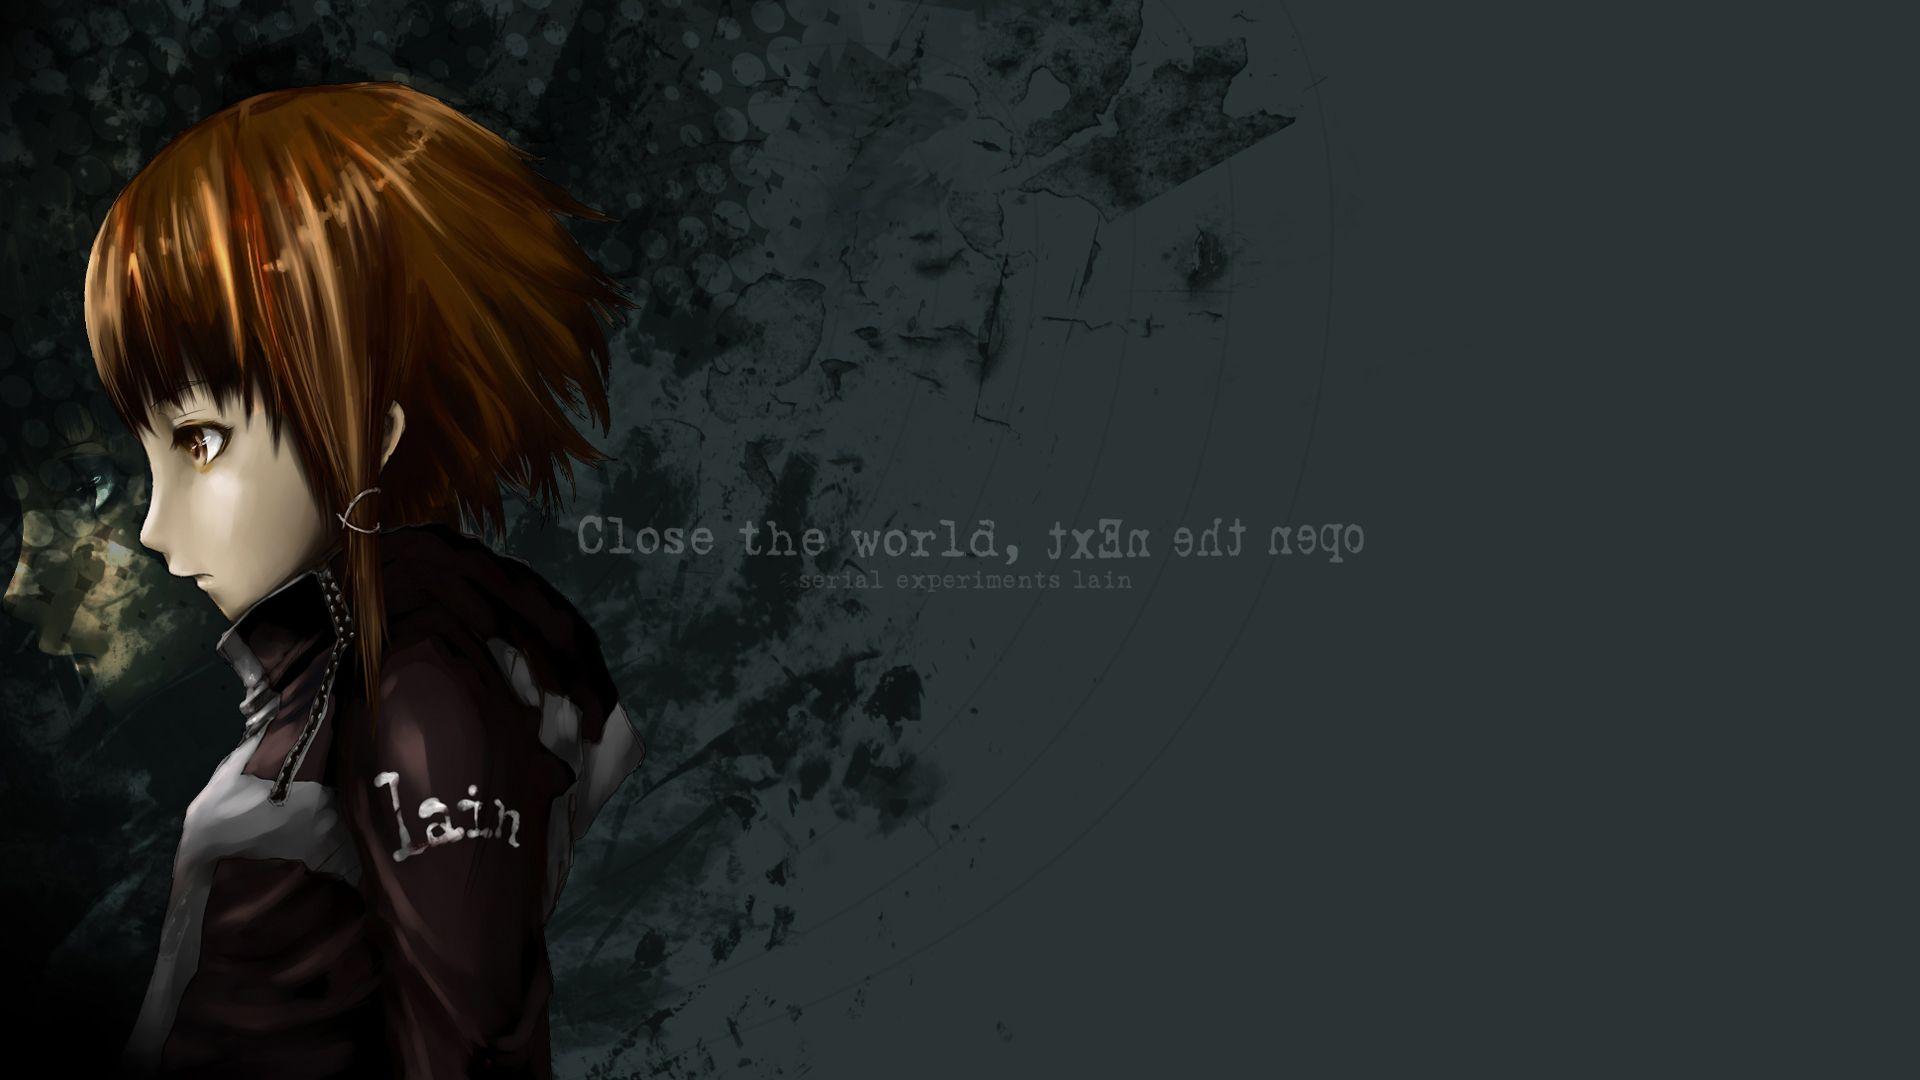 Serial Experiments Lain Wallpaper: close the world, open the nExt